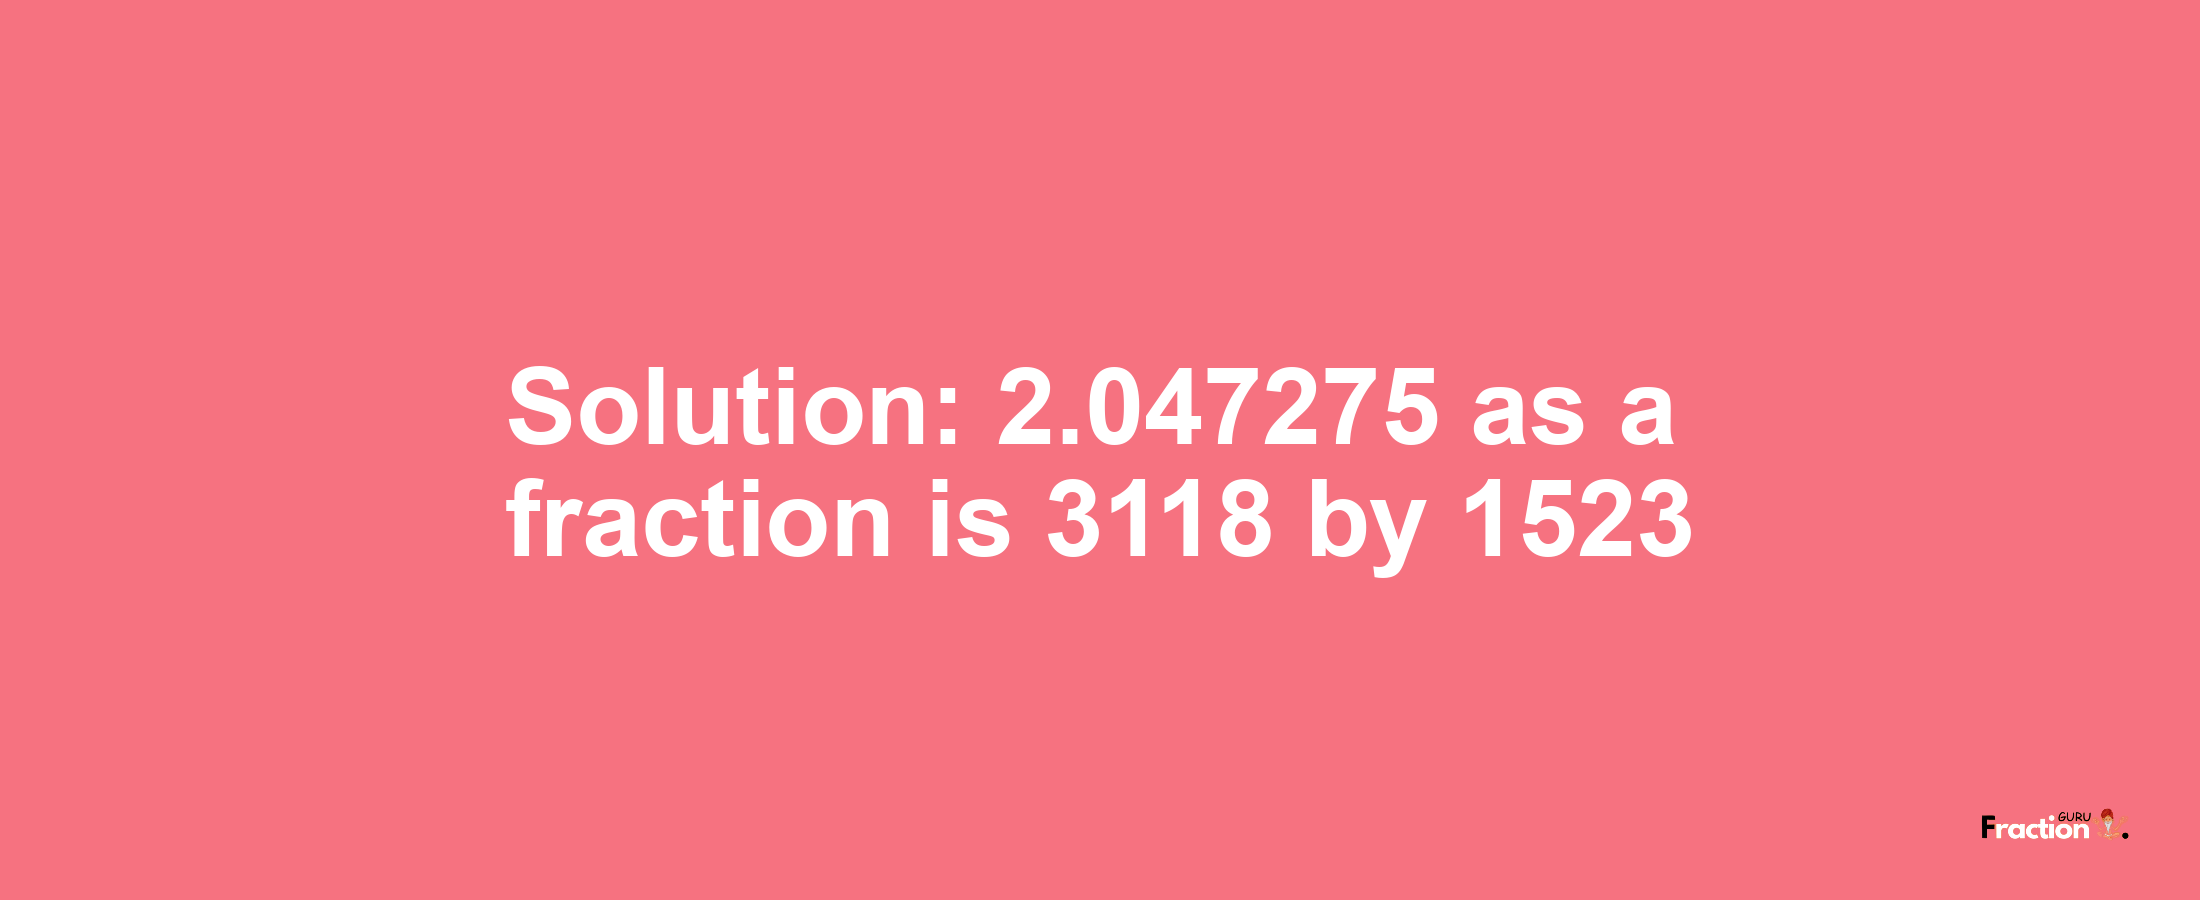 Solution:2.047275 as a fraction is 3118/1523